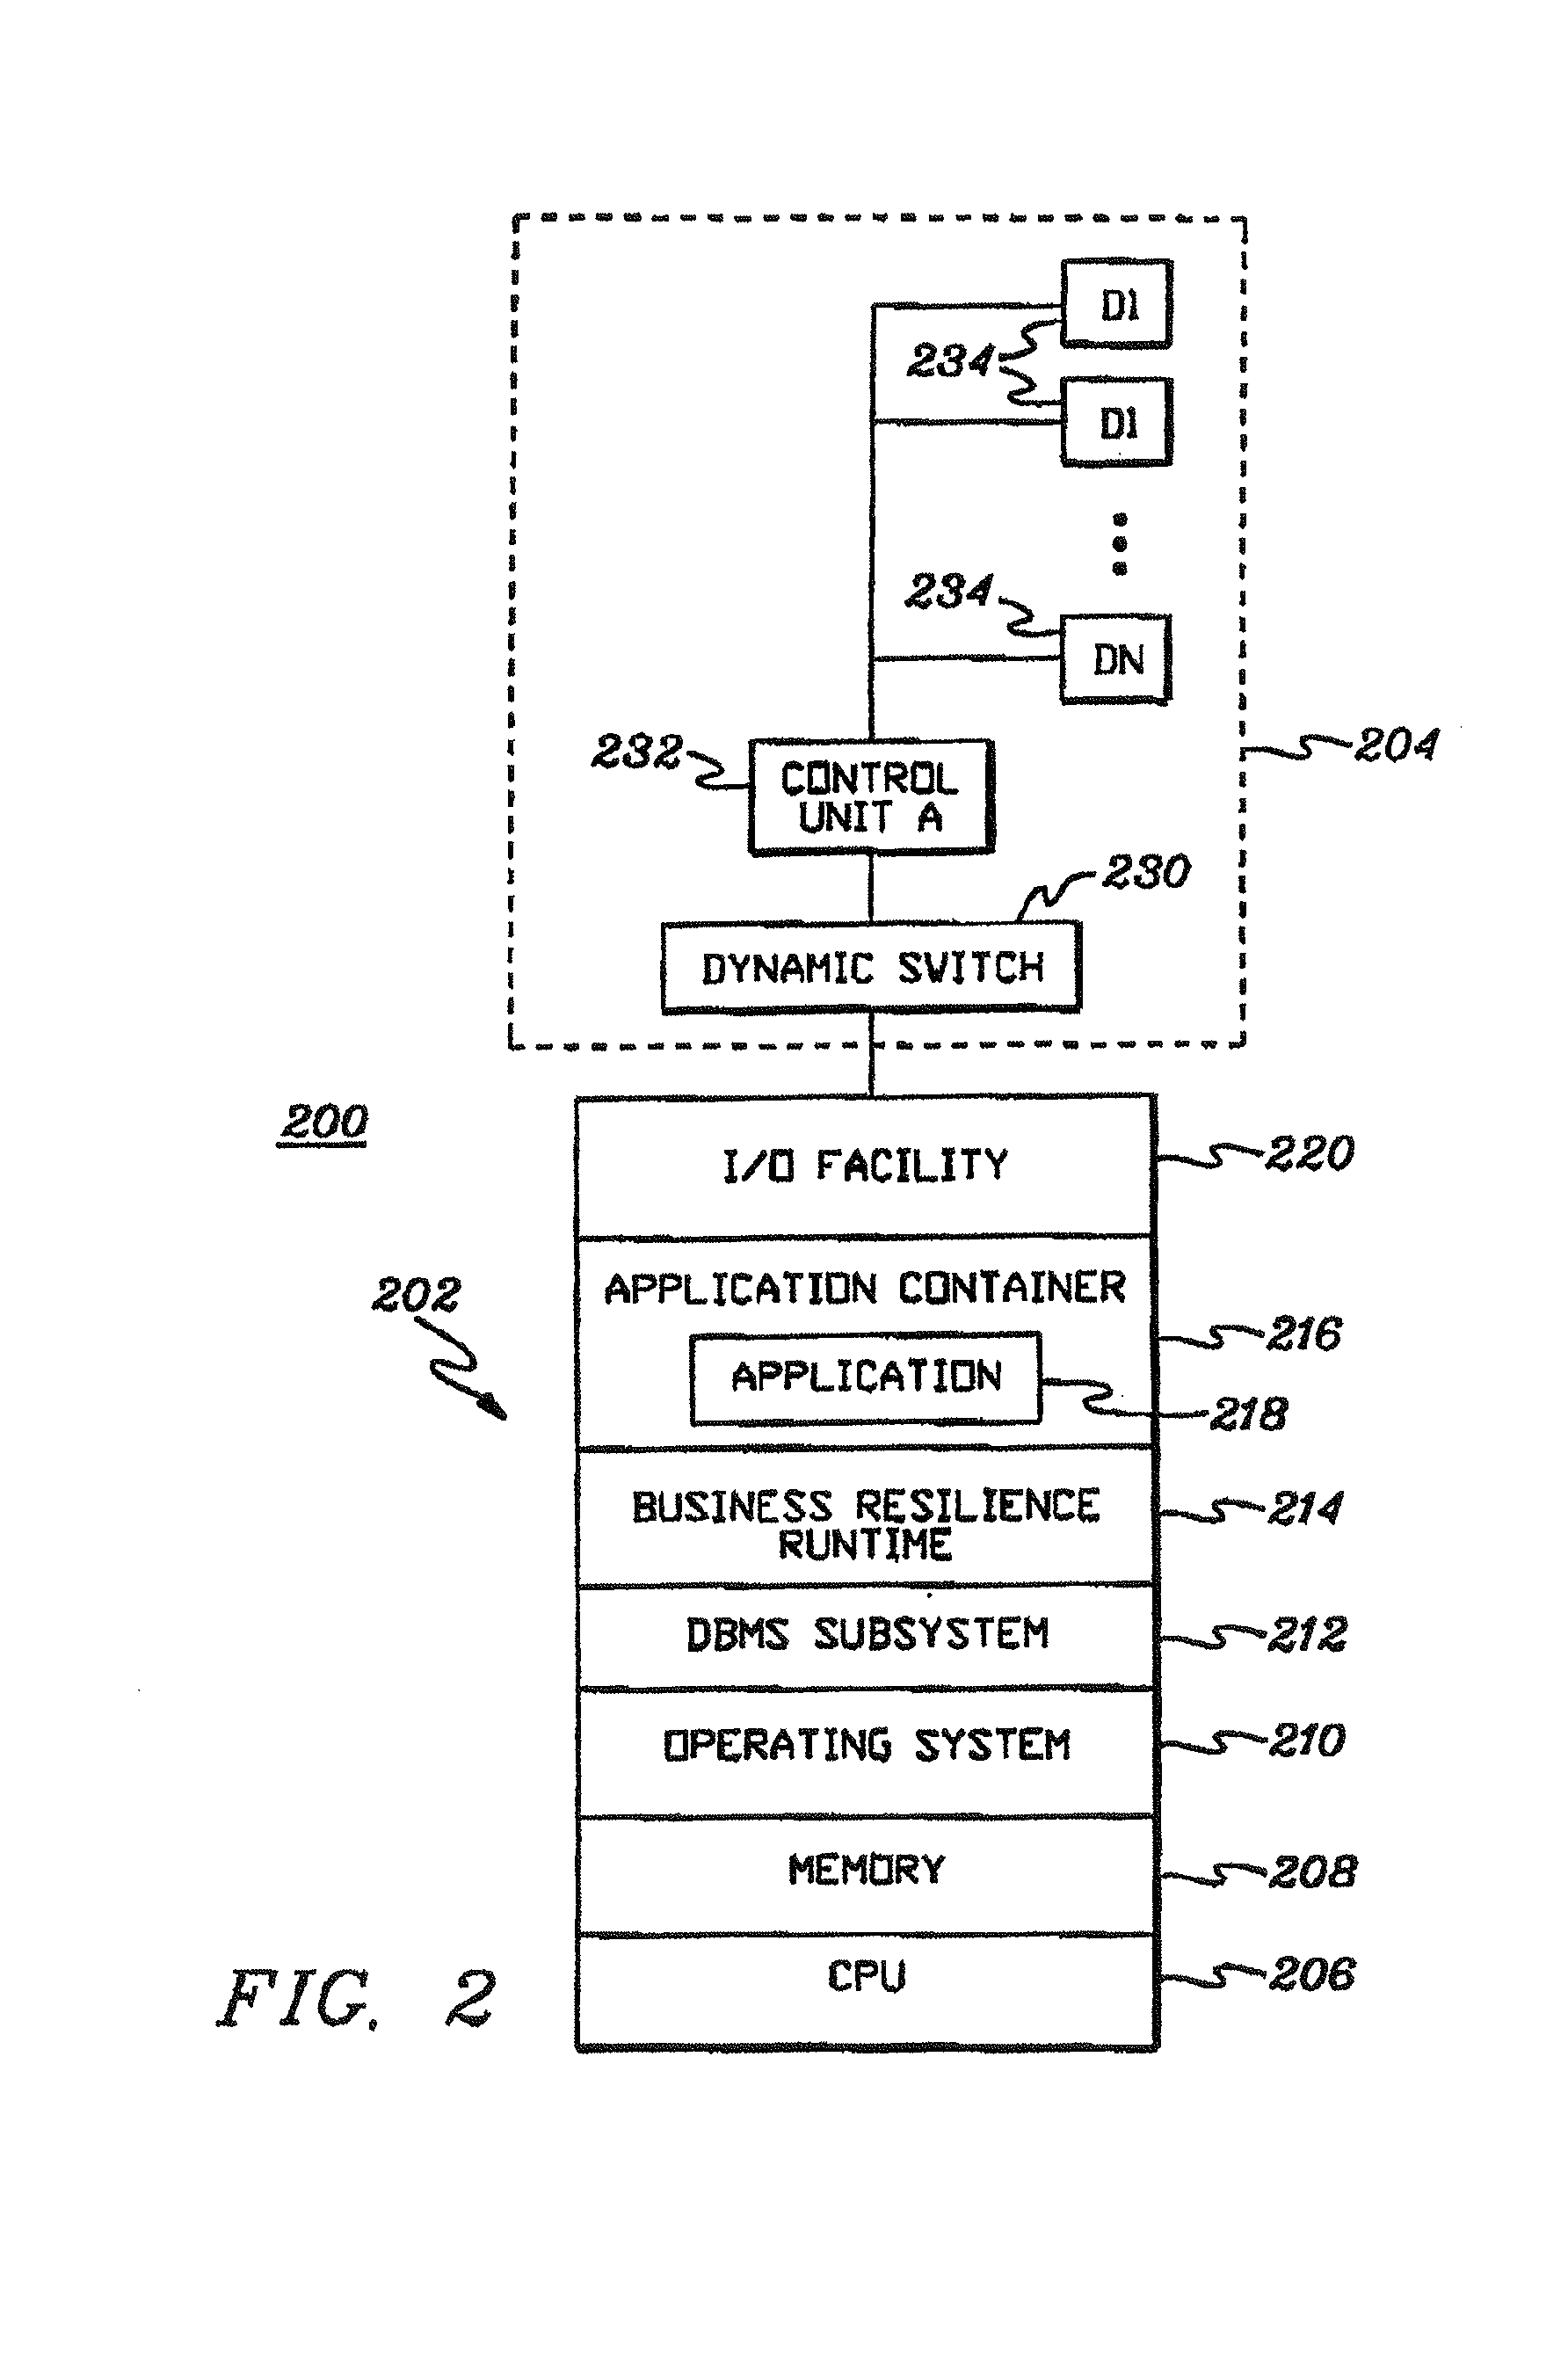 Management of computer events in a computer environment